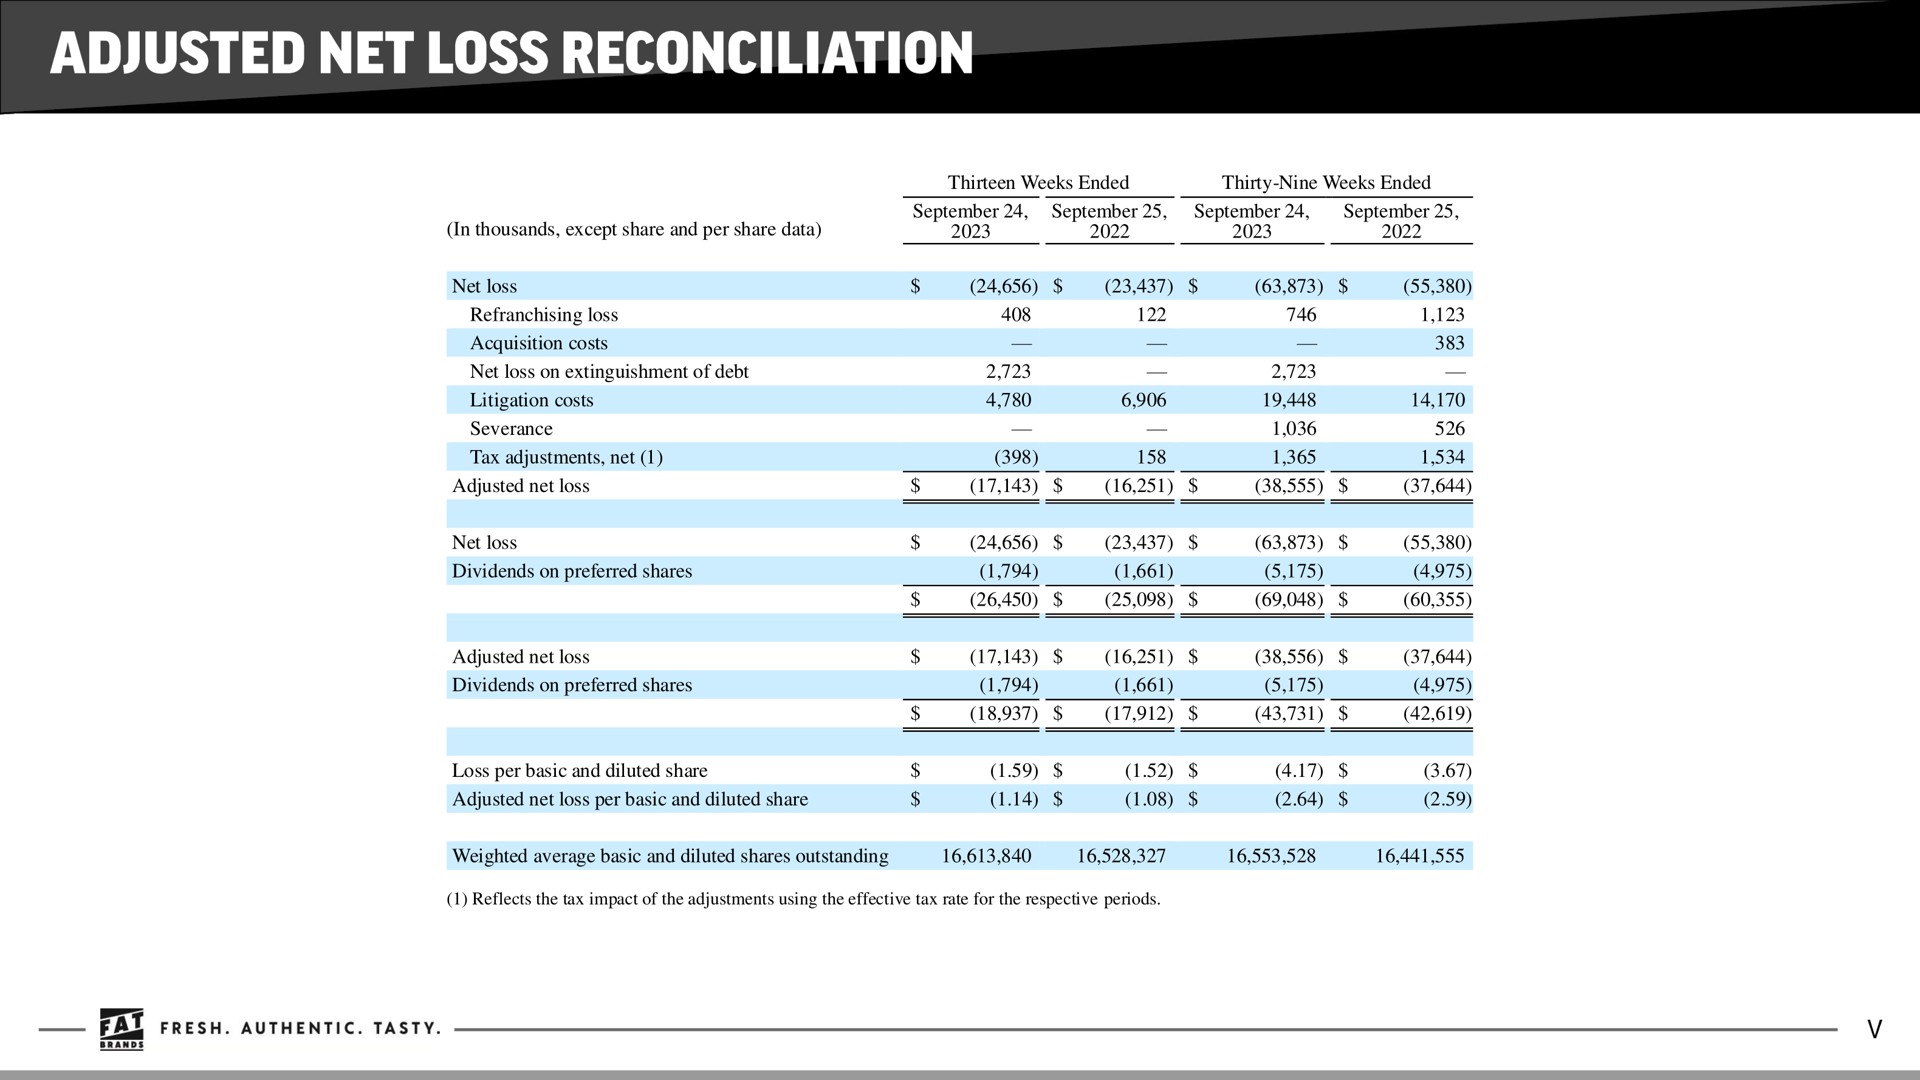 adjusted net loss reconciliation | FAT Brands